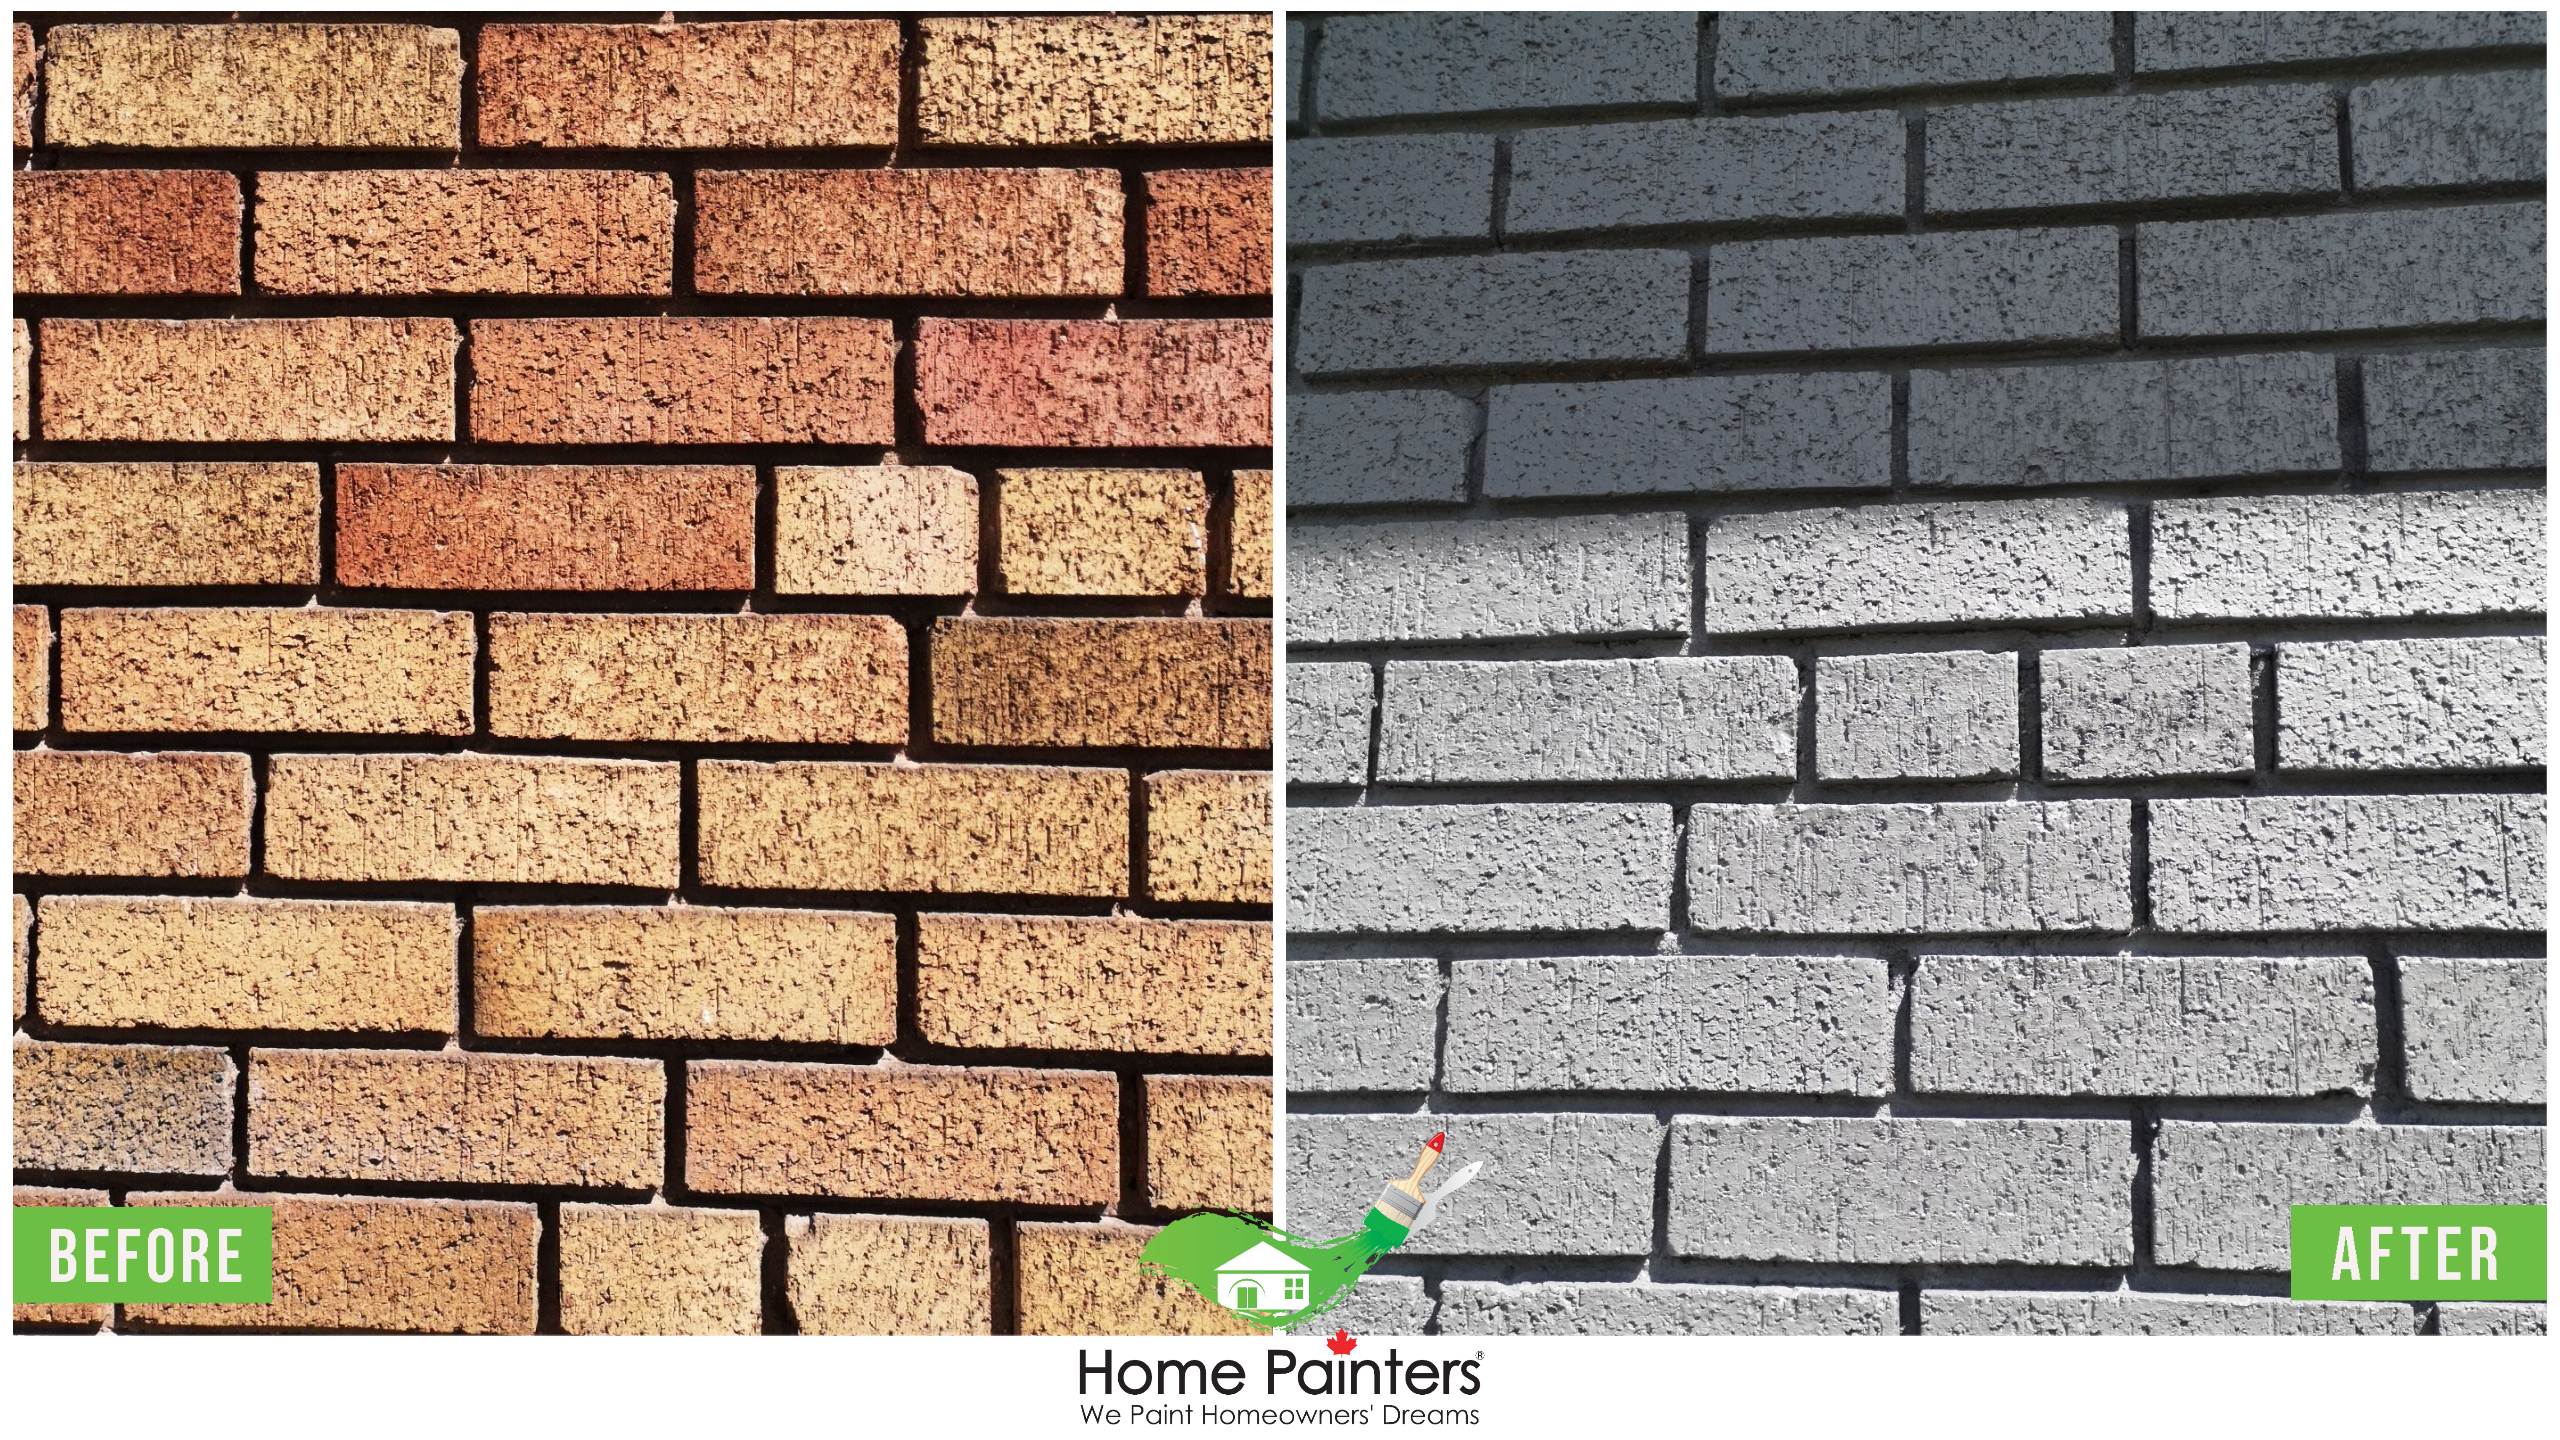 Brick staining before and after from brick red to dark gray close up of bricks